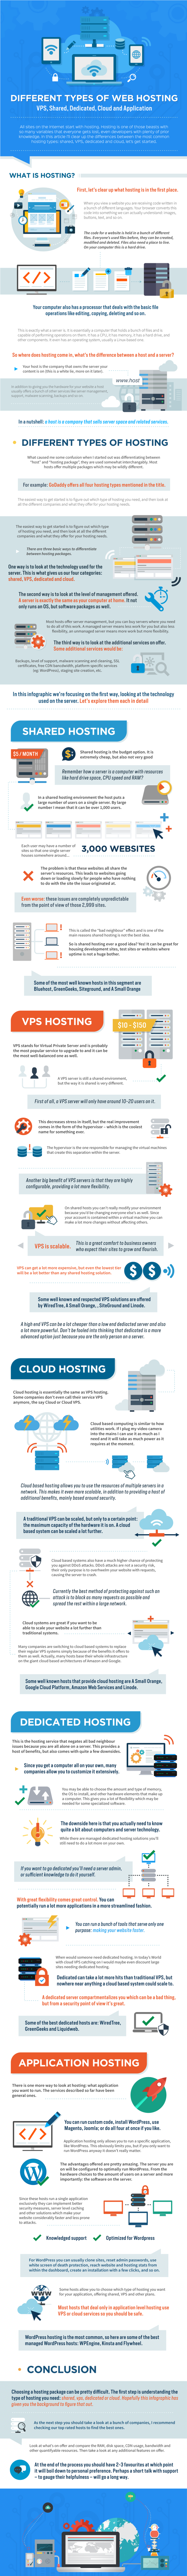 Different-Types-of-Web-Hosting-HD-750x10338